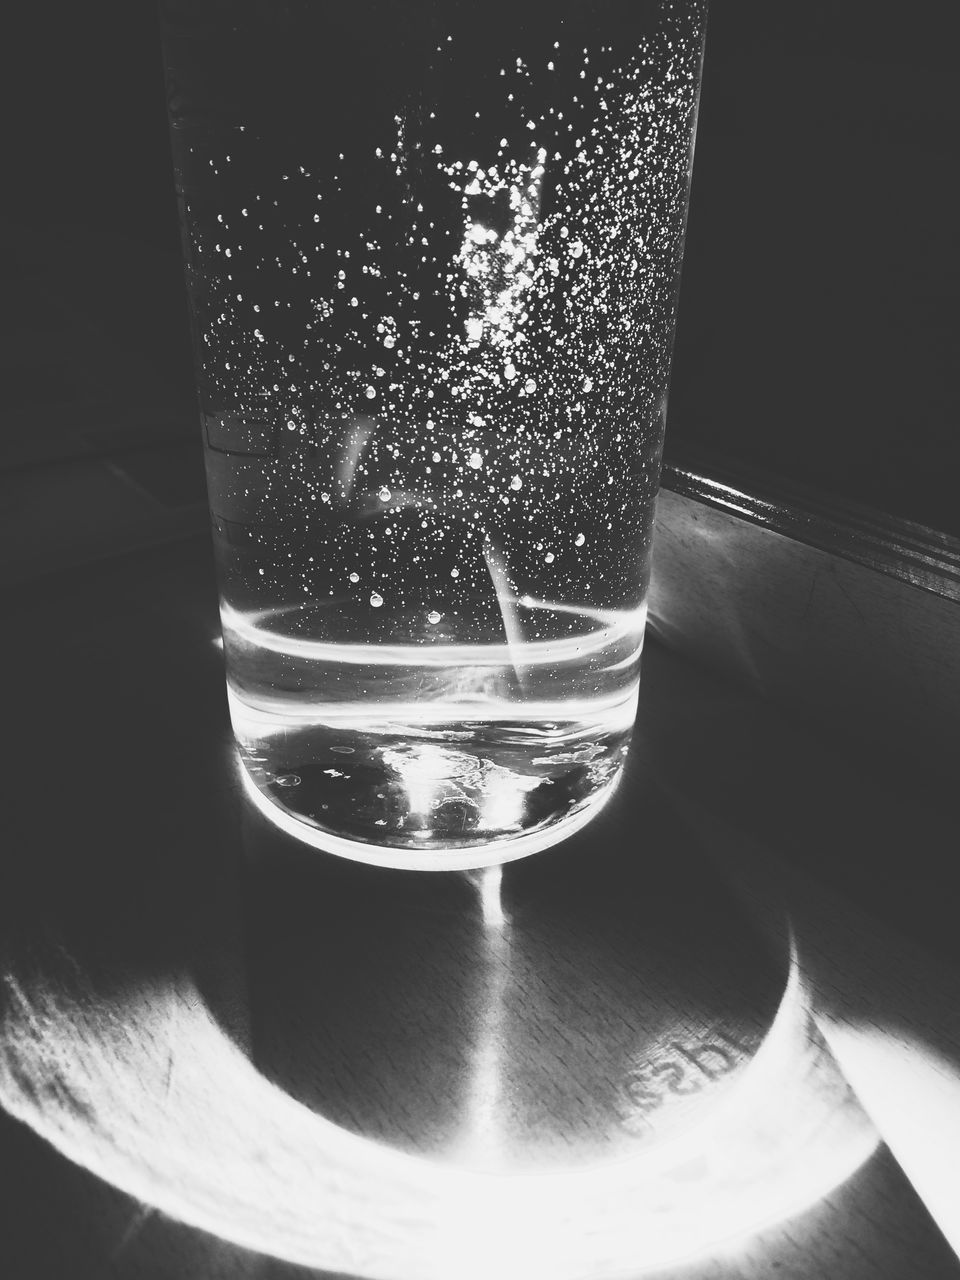 drinking glass, drink, water, refreshment, close-up, purity, drinking water, indoors, no people, fragility, black background, illuminated, refraction, tonic water, freshness, day